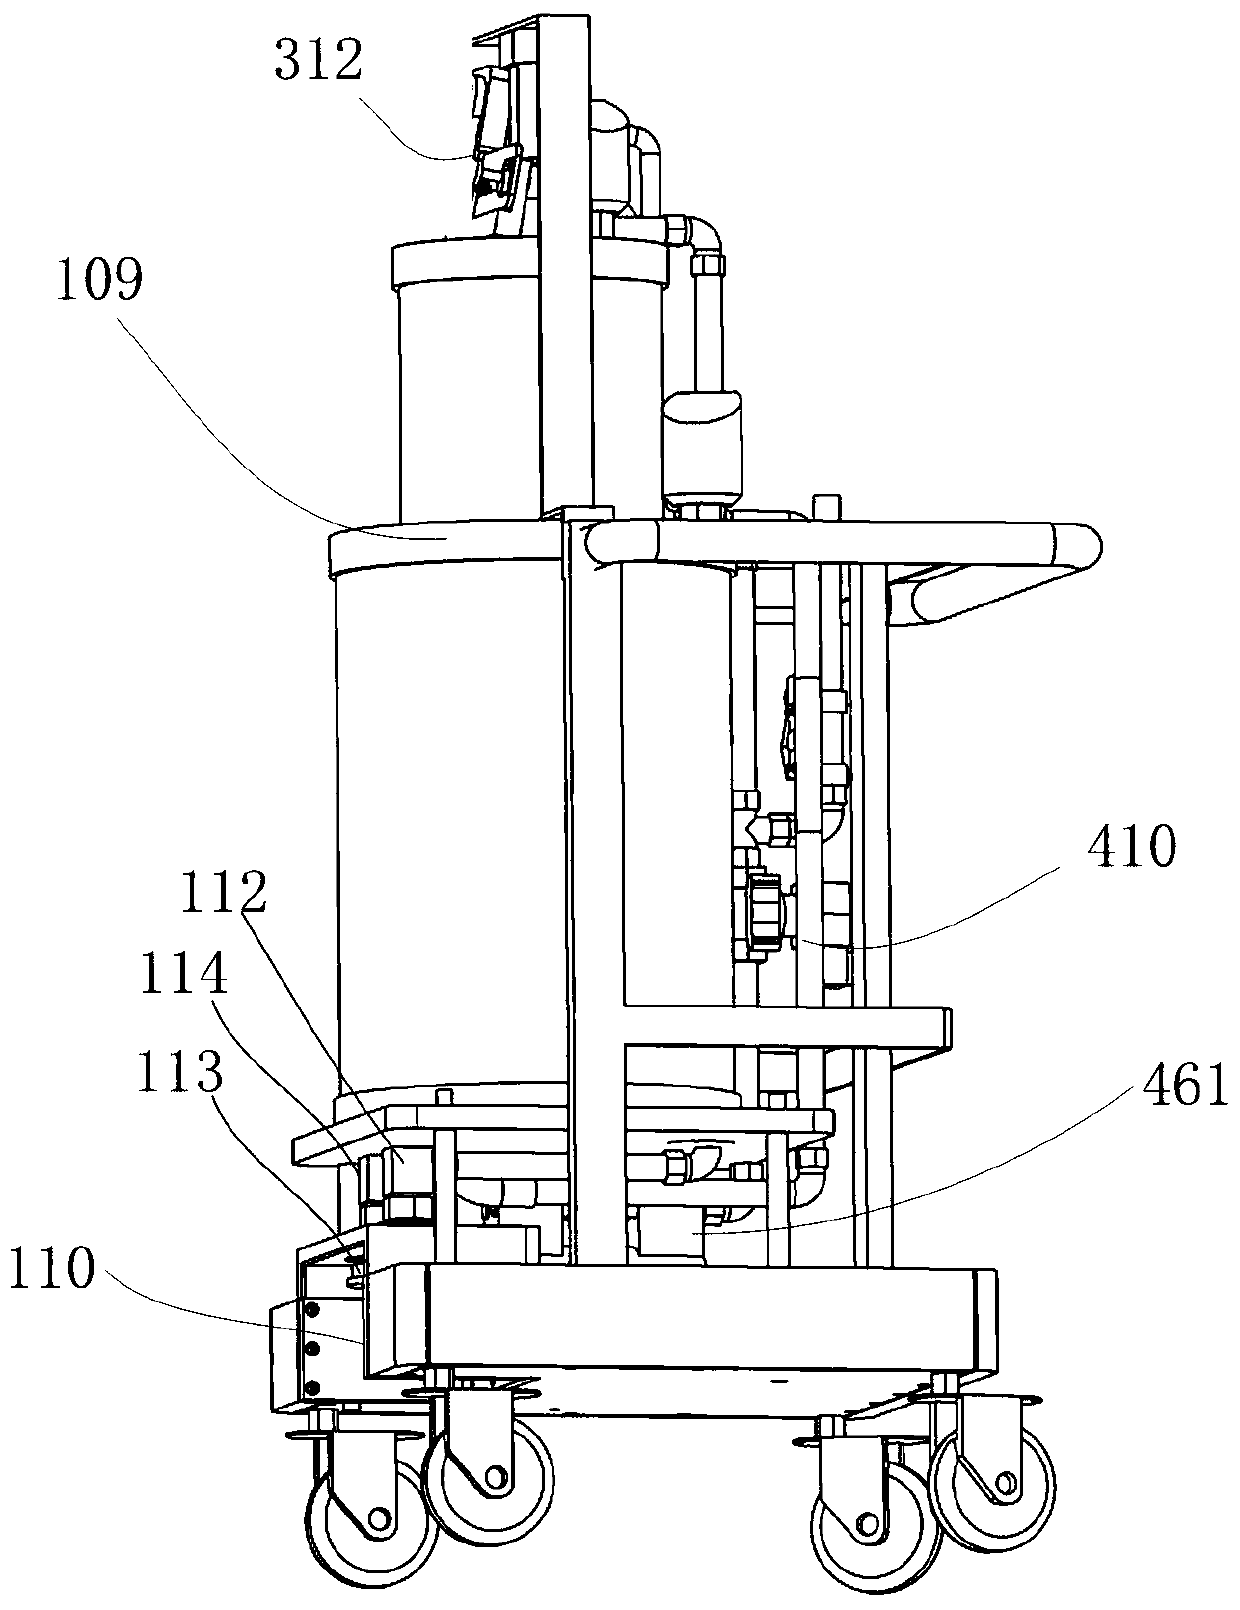 Docking device and waste liquid collection and treatment system